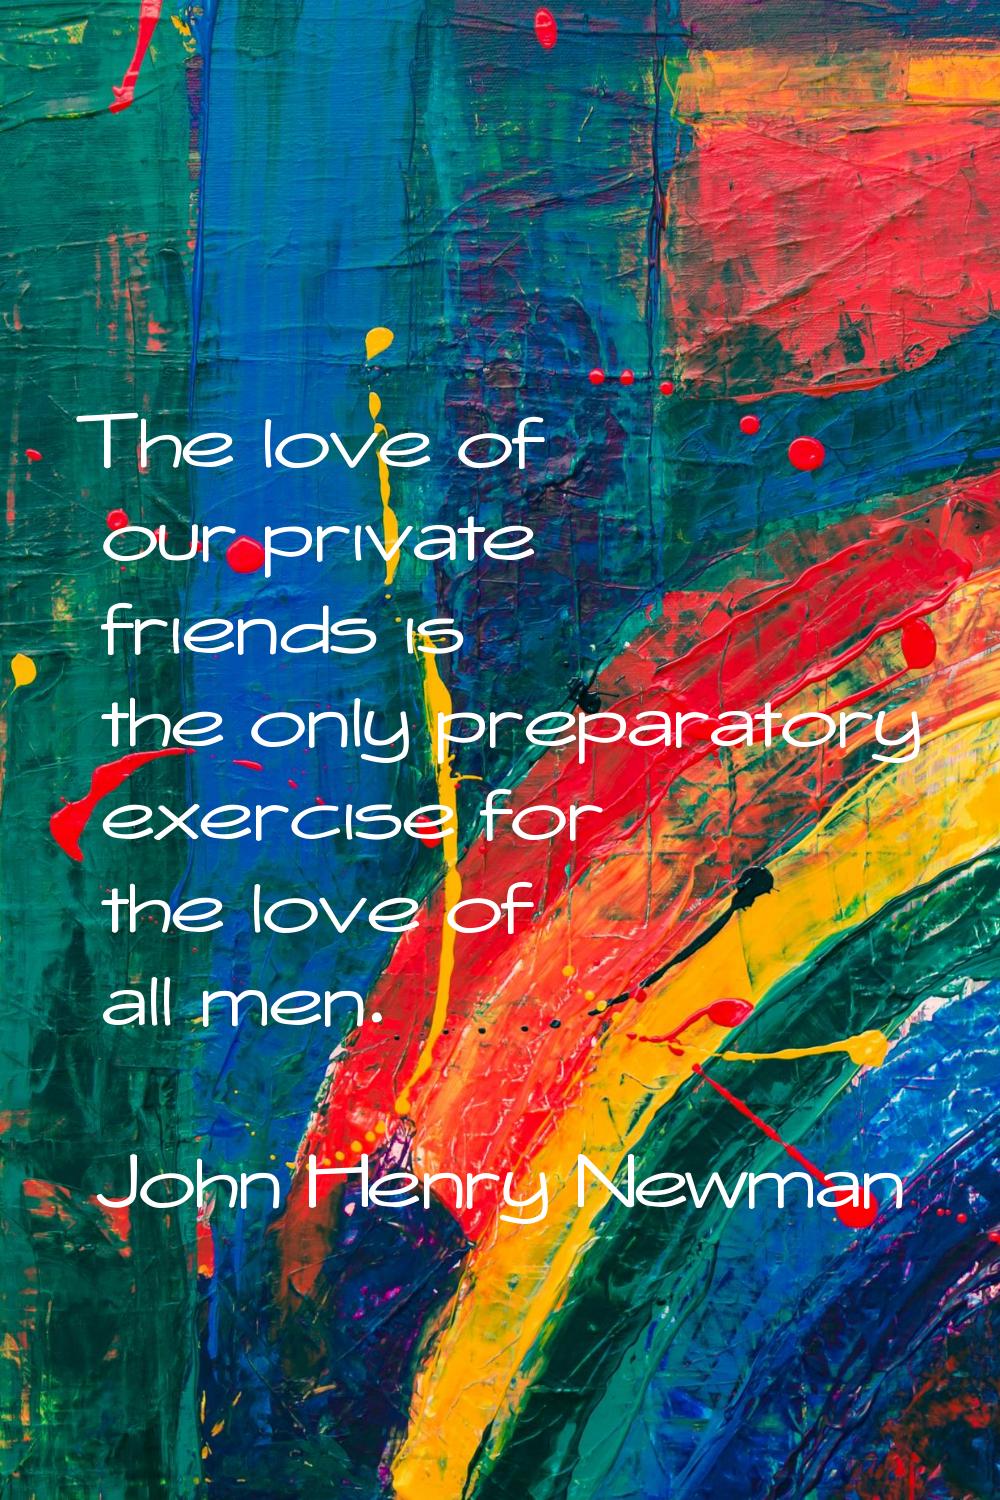 The love of our private friends is the only preparatory exercise for the love of all men.